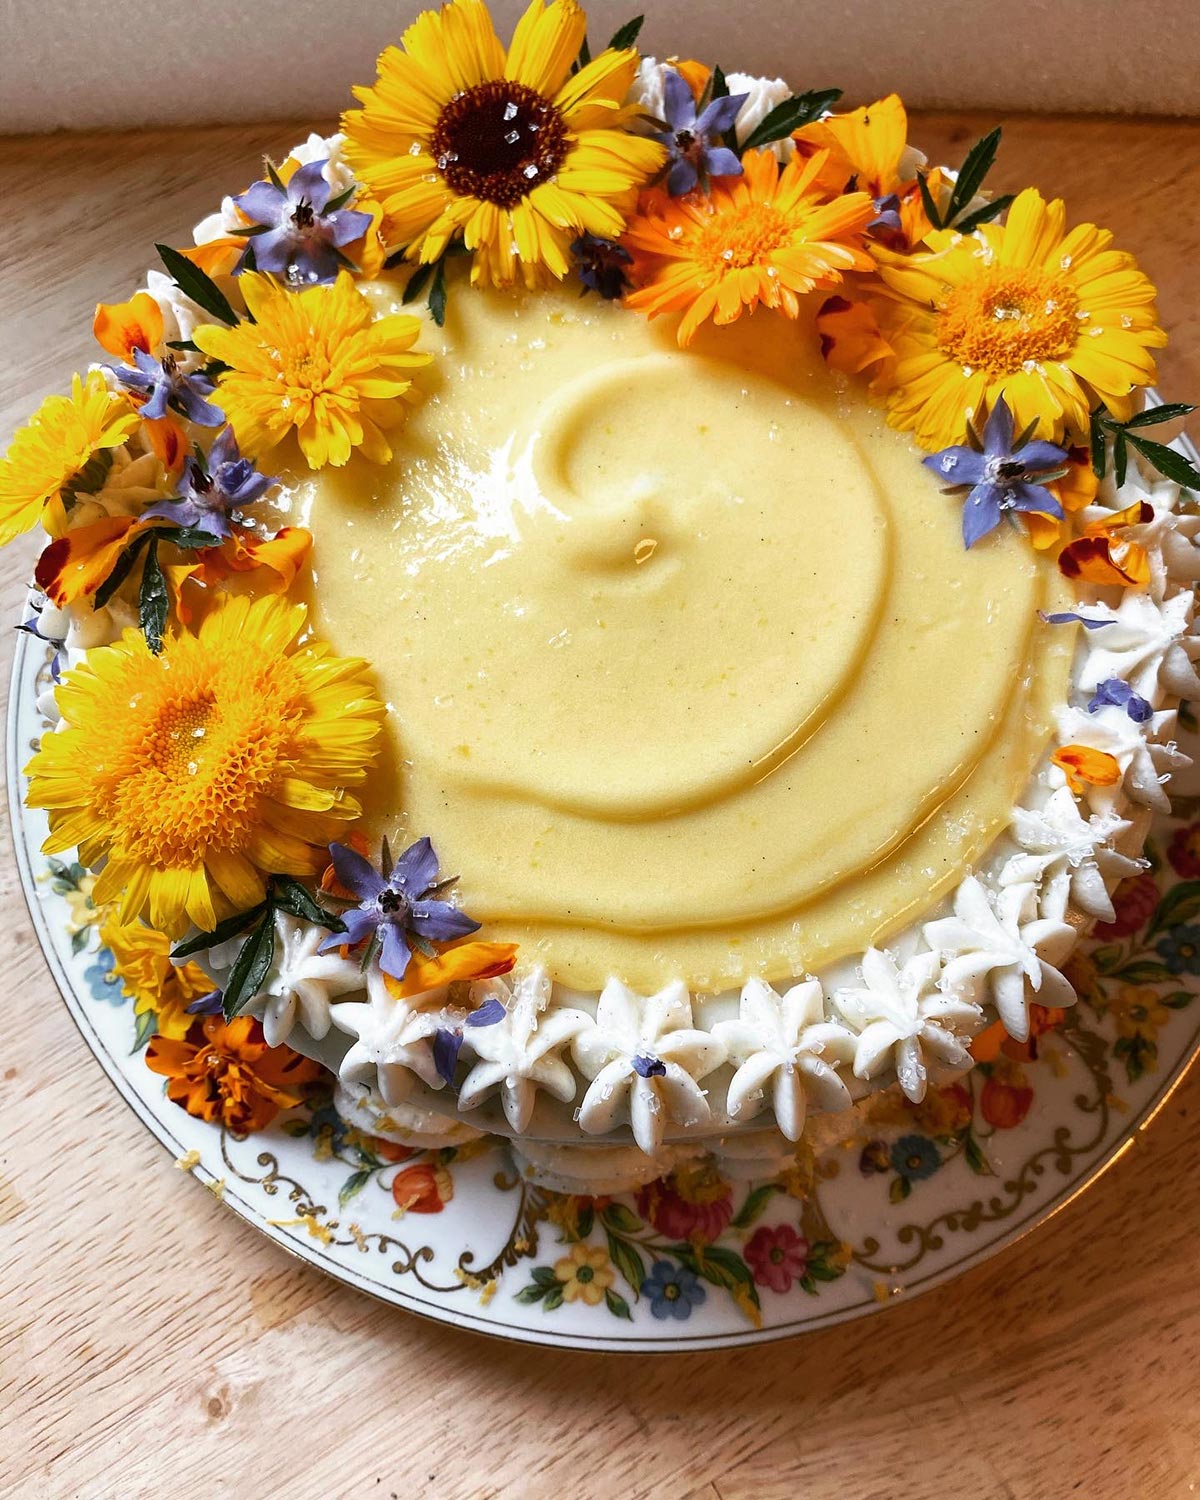 How to use edible flowers for cakes and other bakes | King Arthur ...